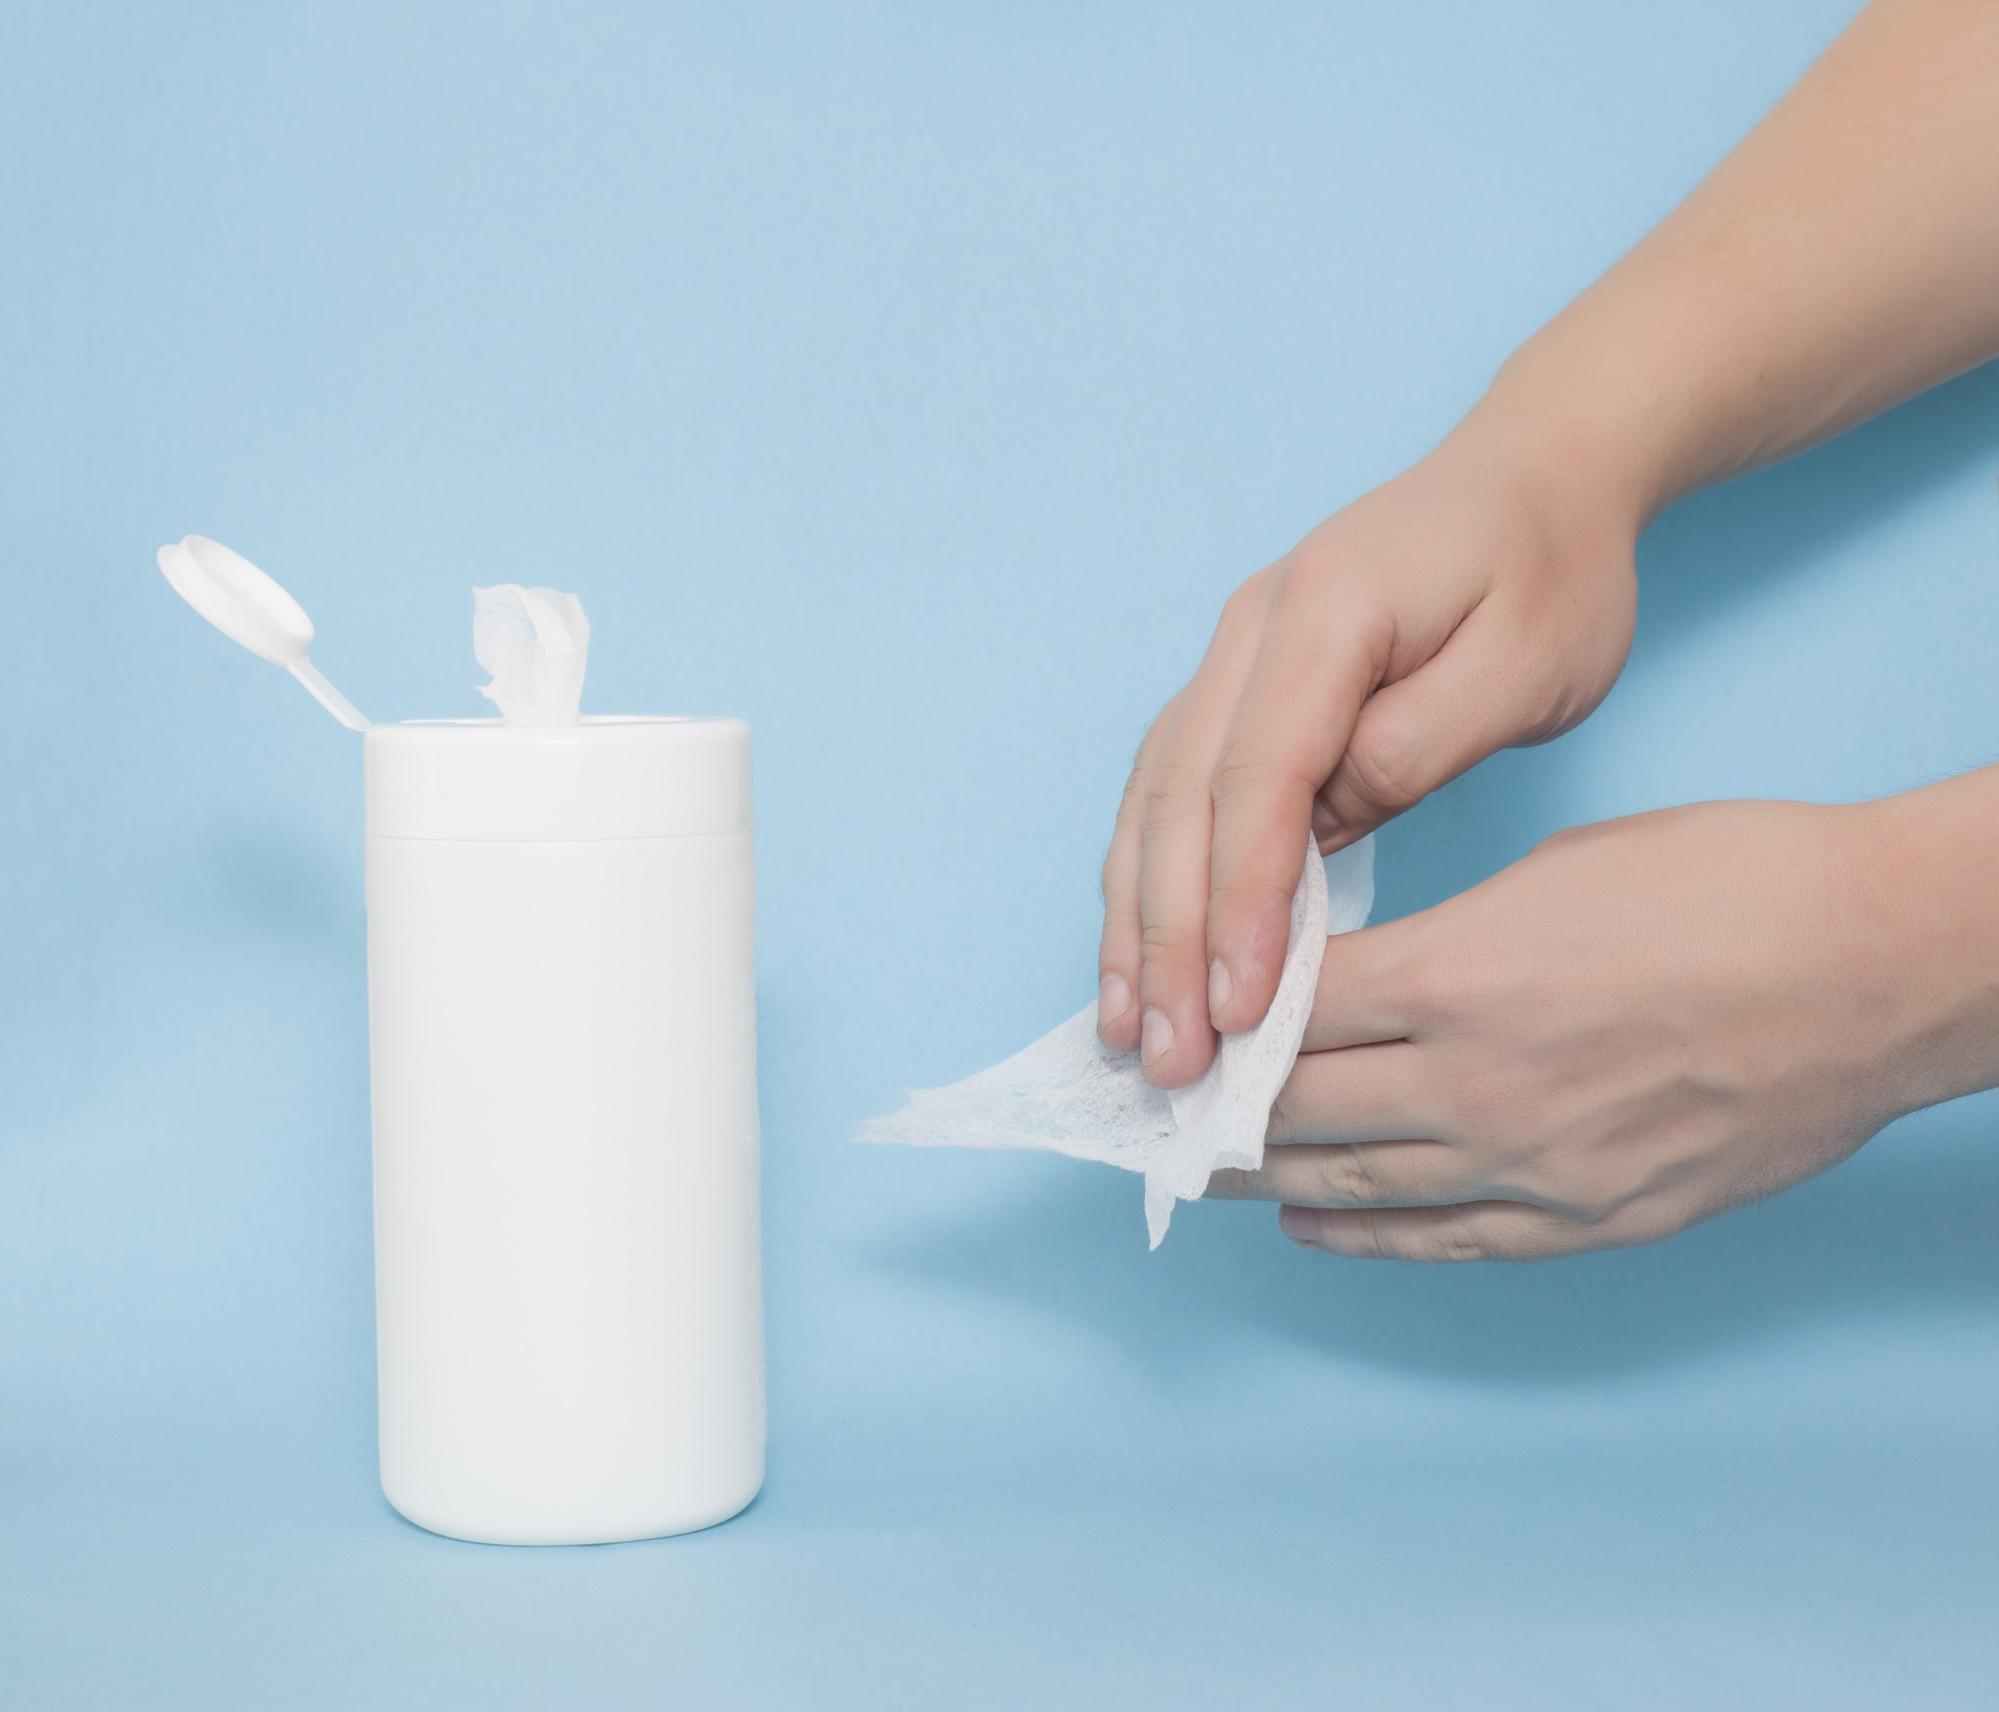 Disinfecting your hand with wipes